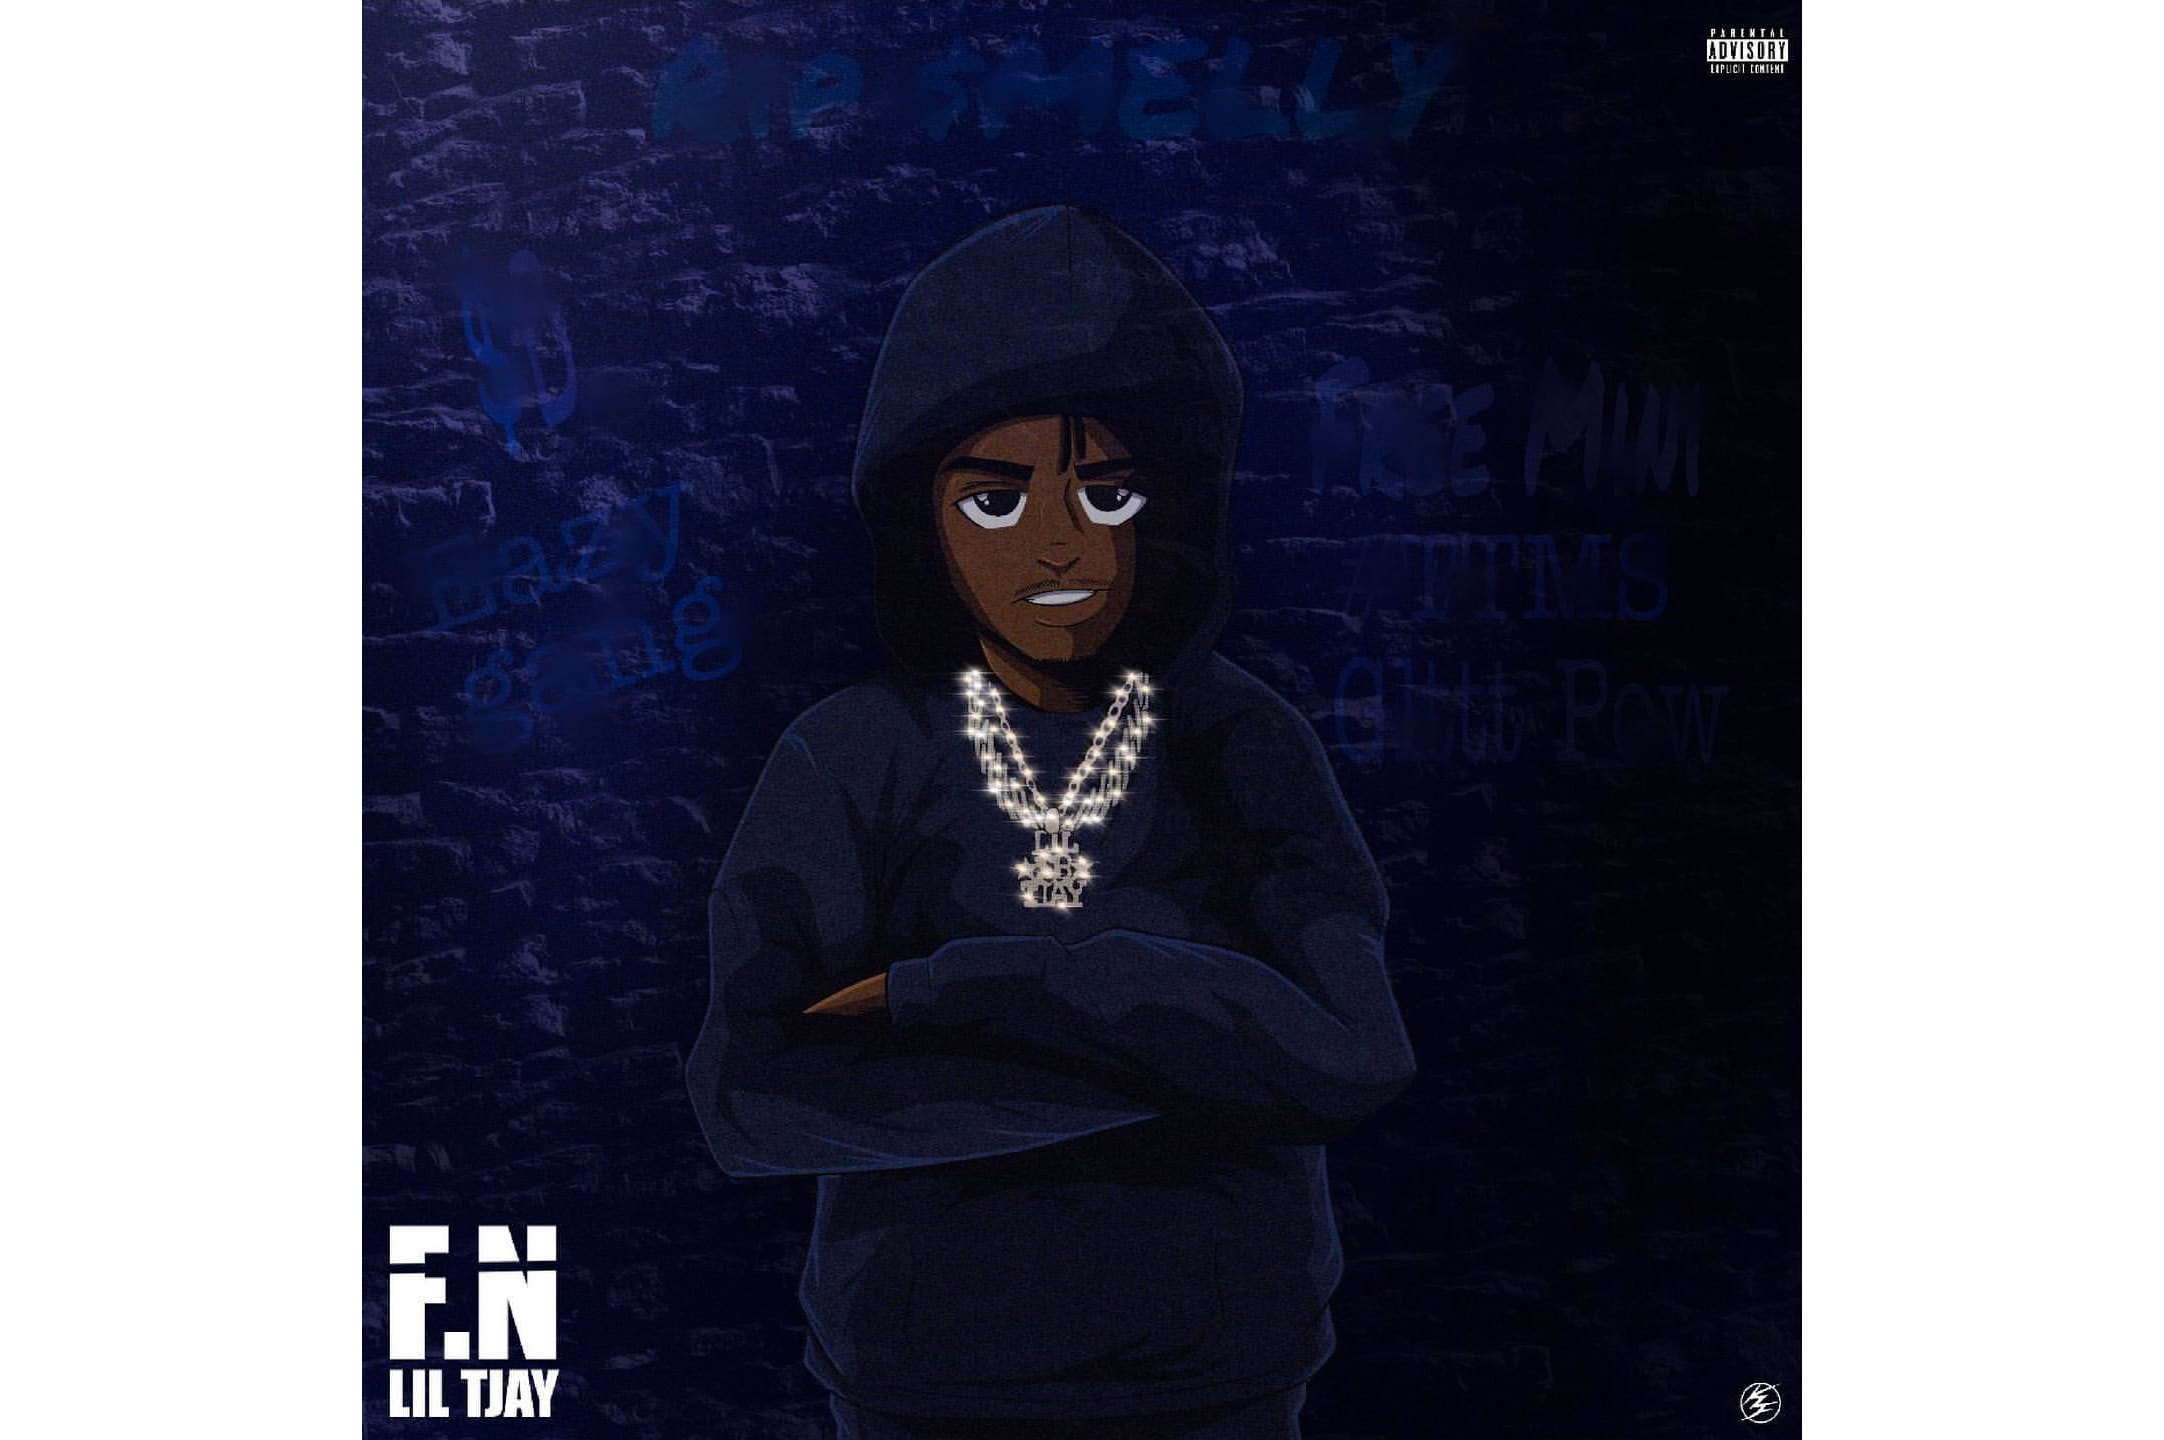 Lil Tjay F.N Single Stream the prince of new york music video